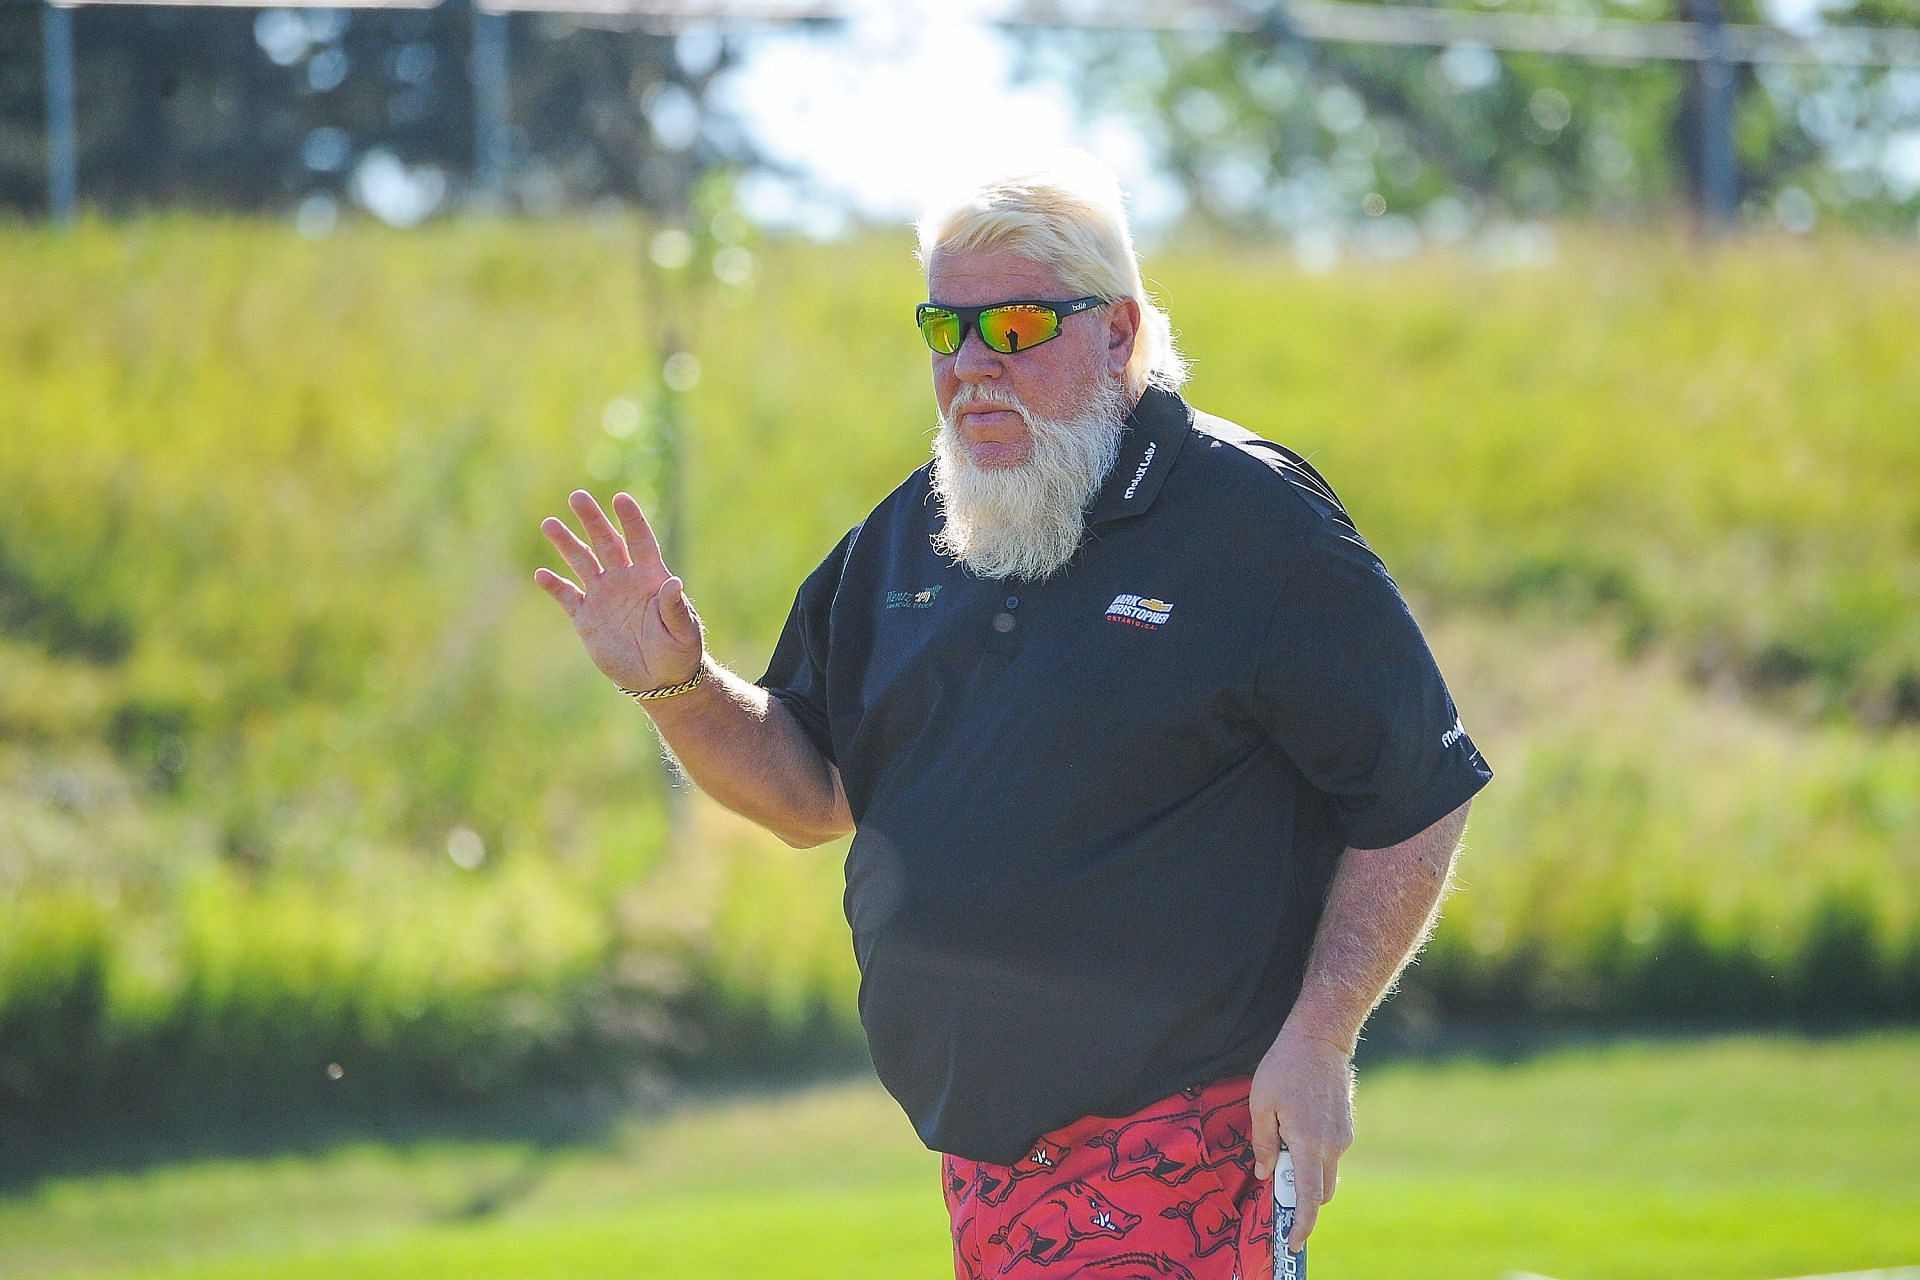 John Daly at the 2022 Shaw Charity Classic (Image via Getty).